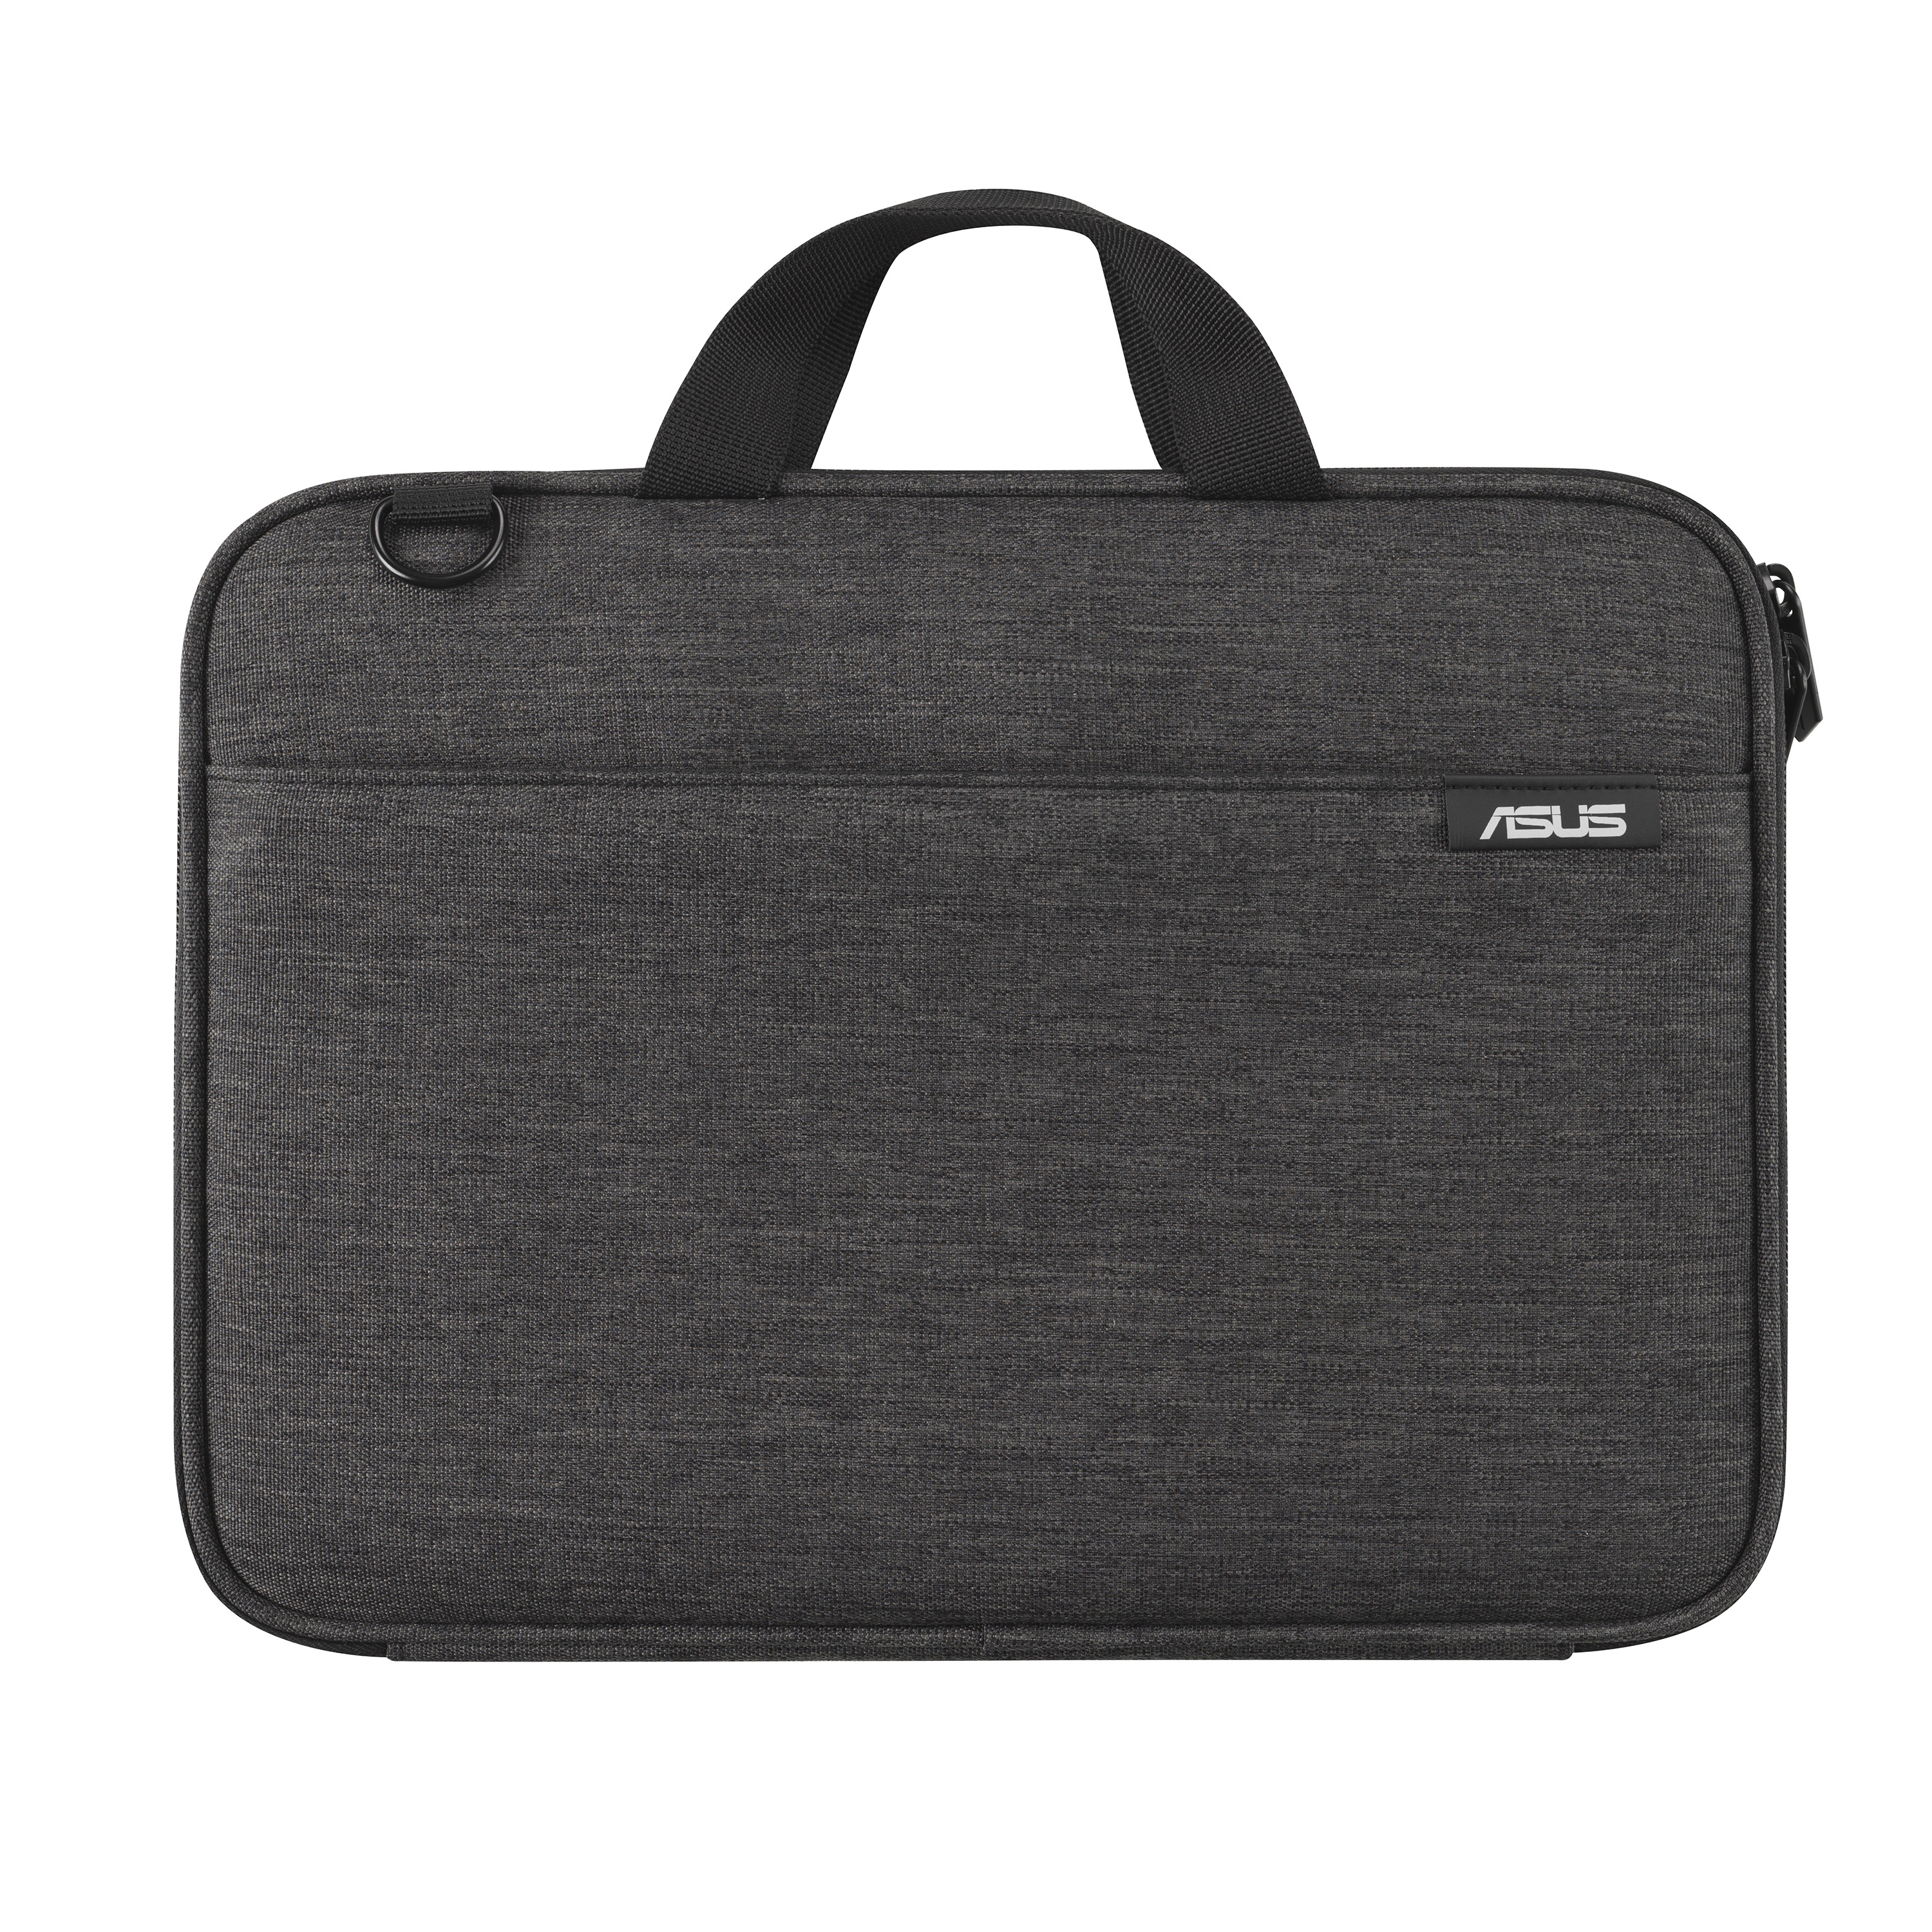 Asustek - Notebook & Pda Accs    Asus As1200 Sleeve Case             With Handle For 11.6in Laptops      90xb07h0-bsl000